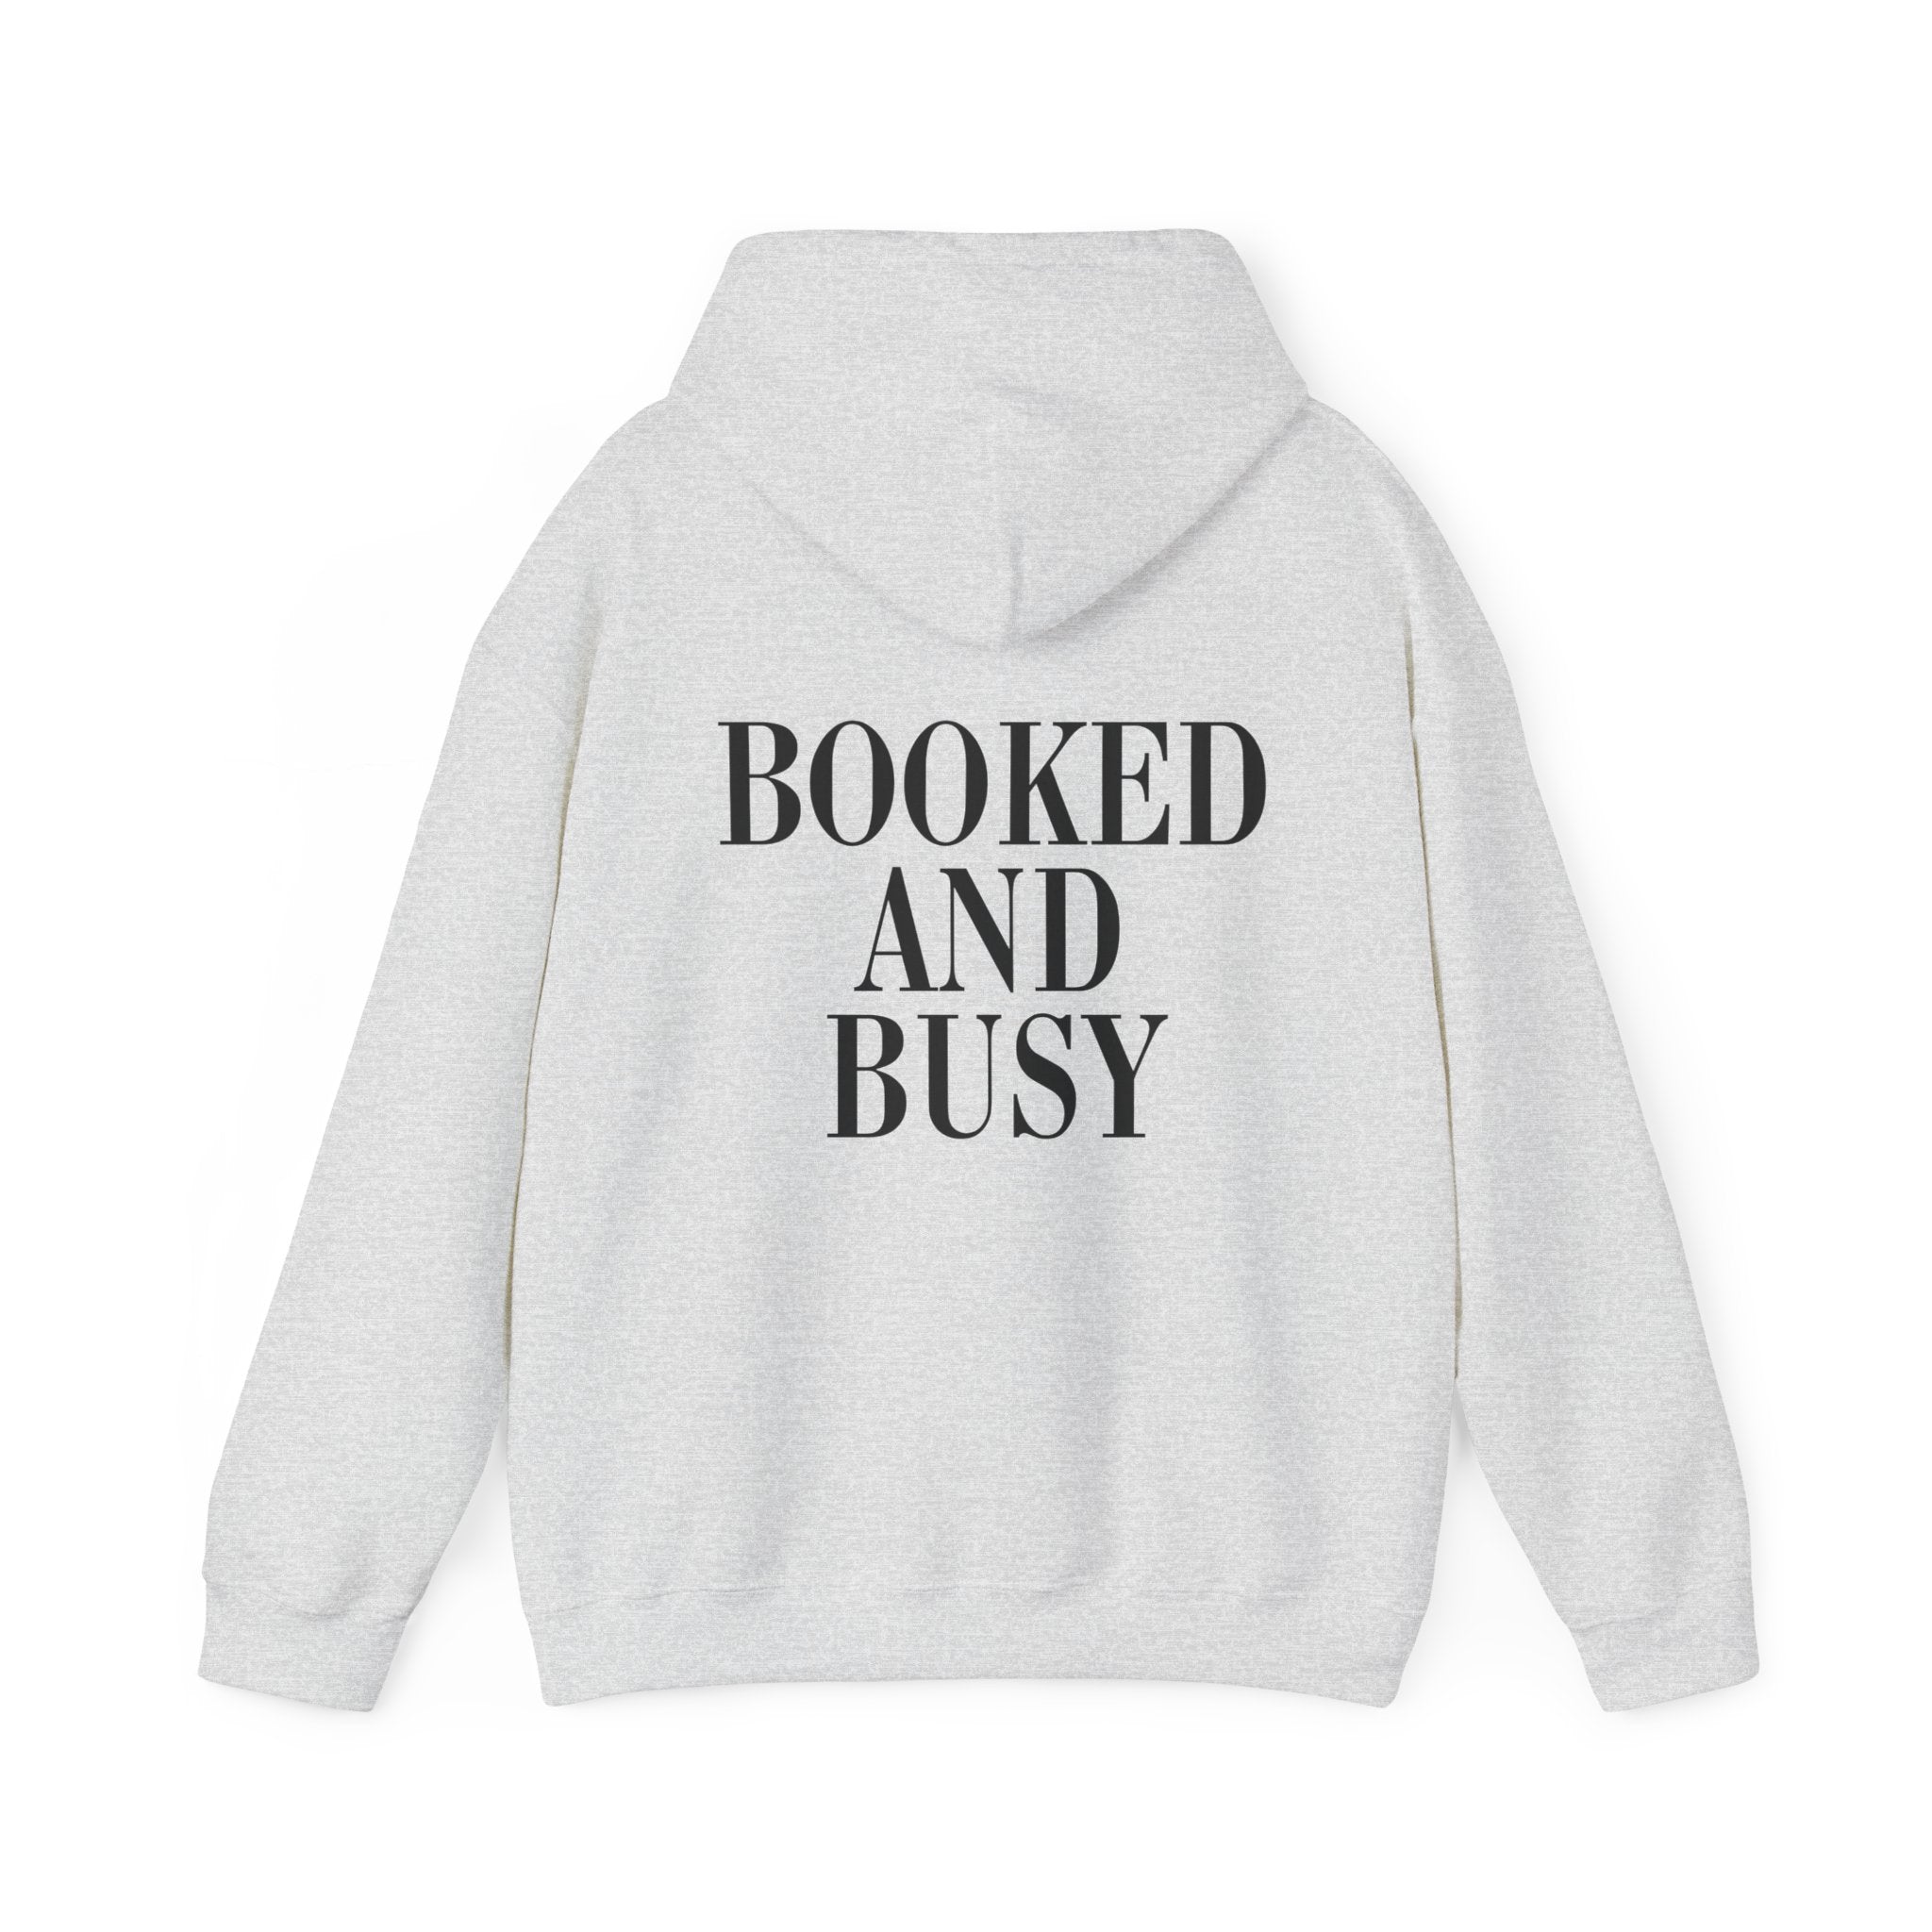 Booked and Busy Hoodie Sweatshirt